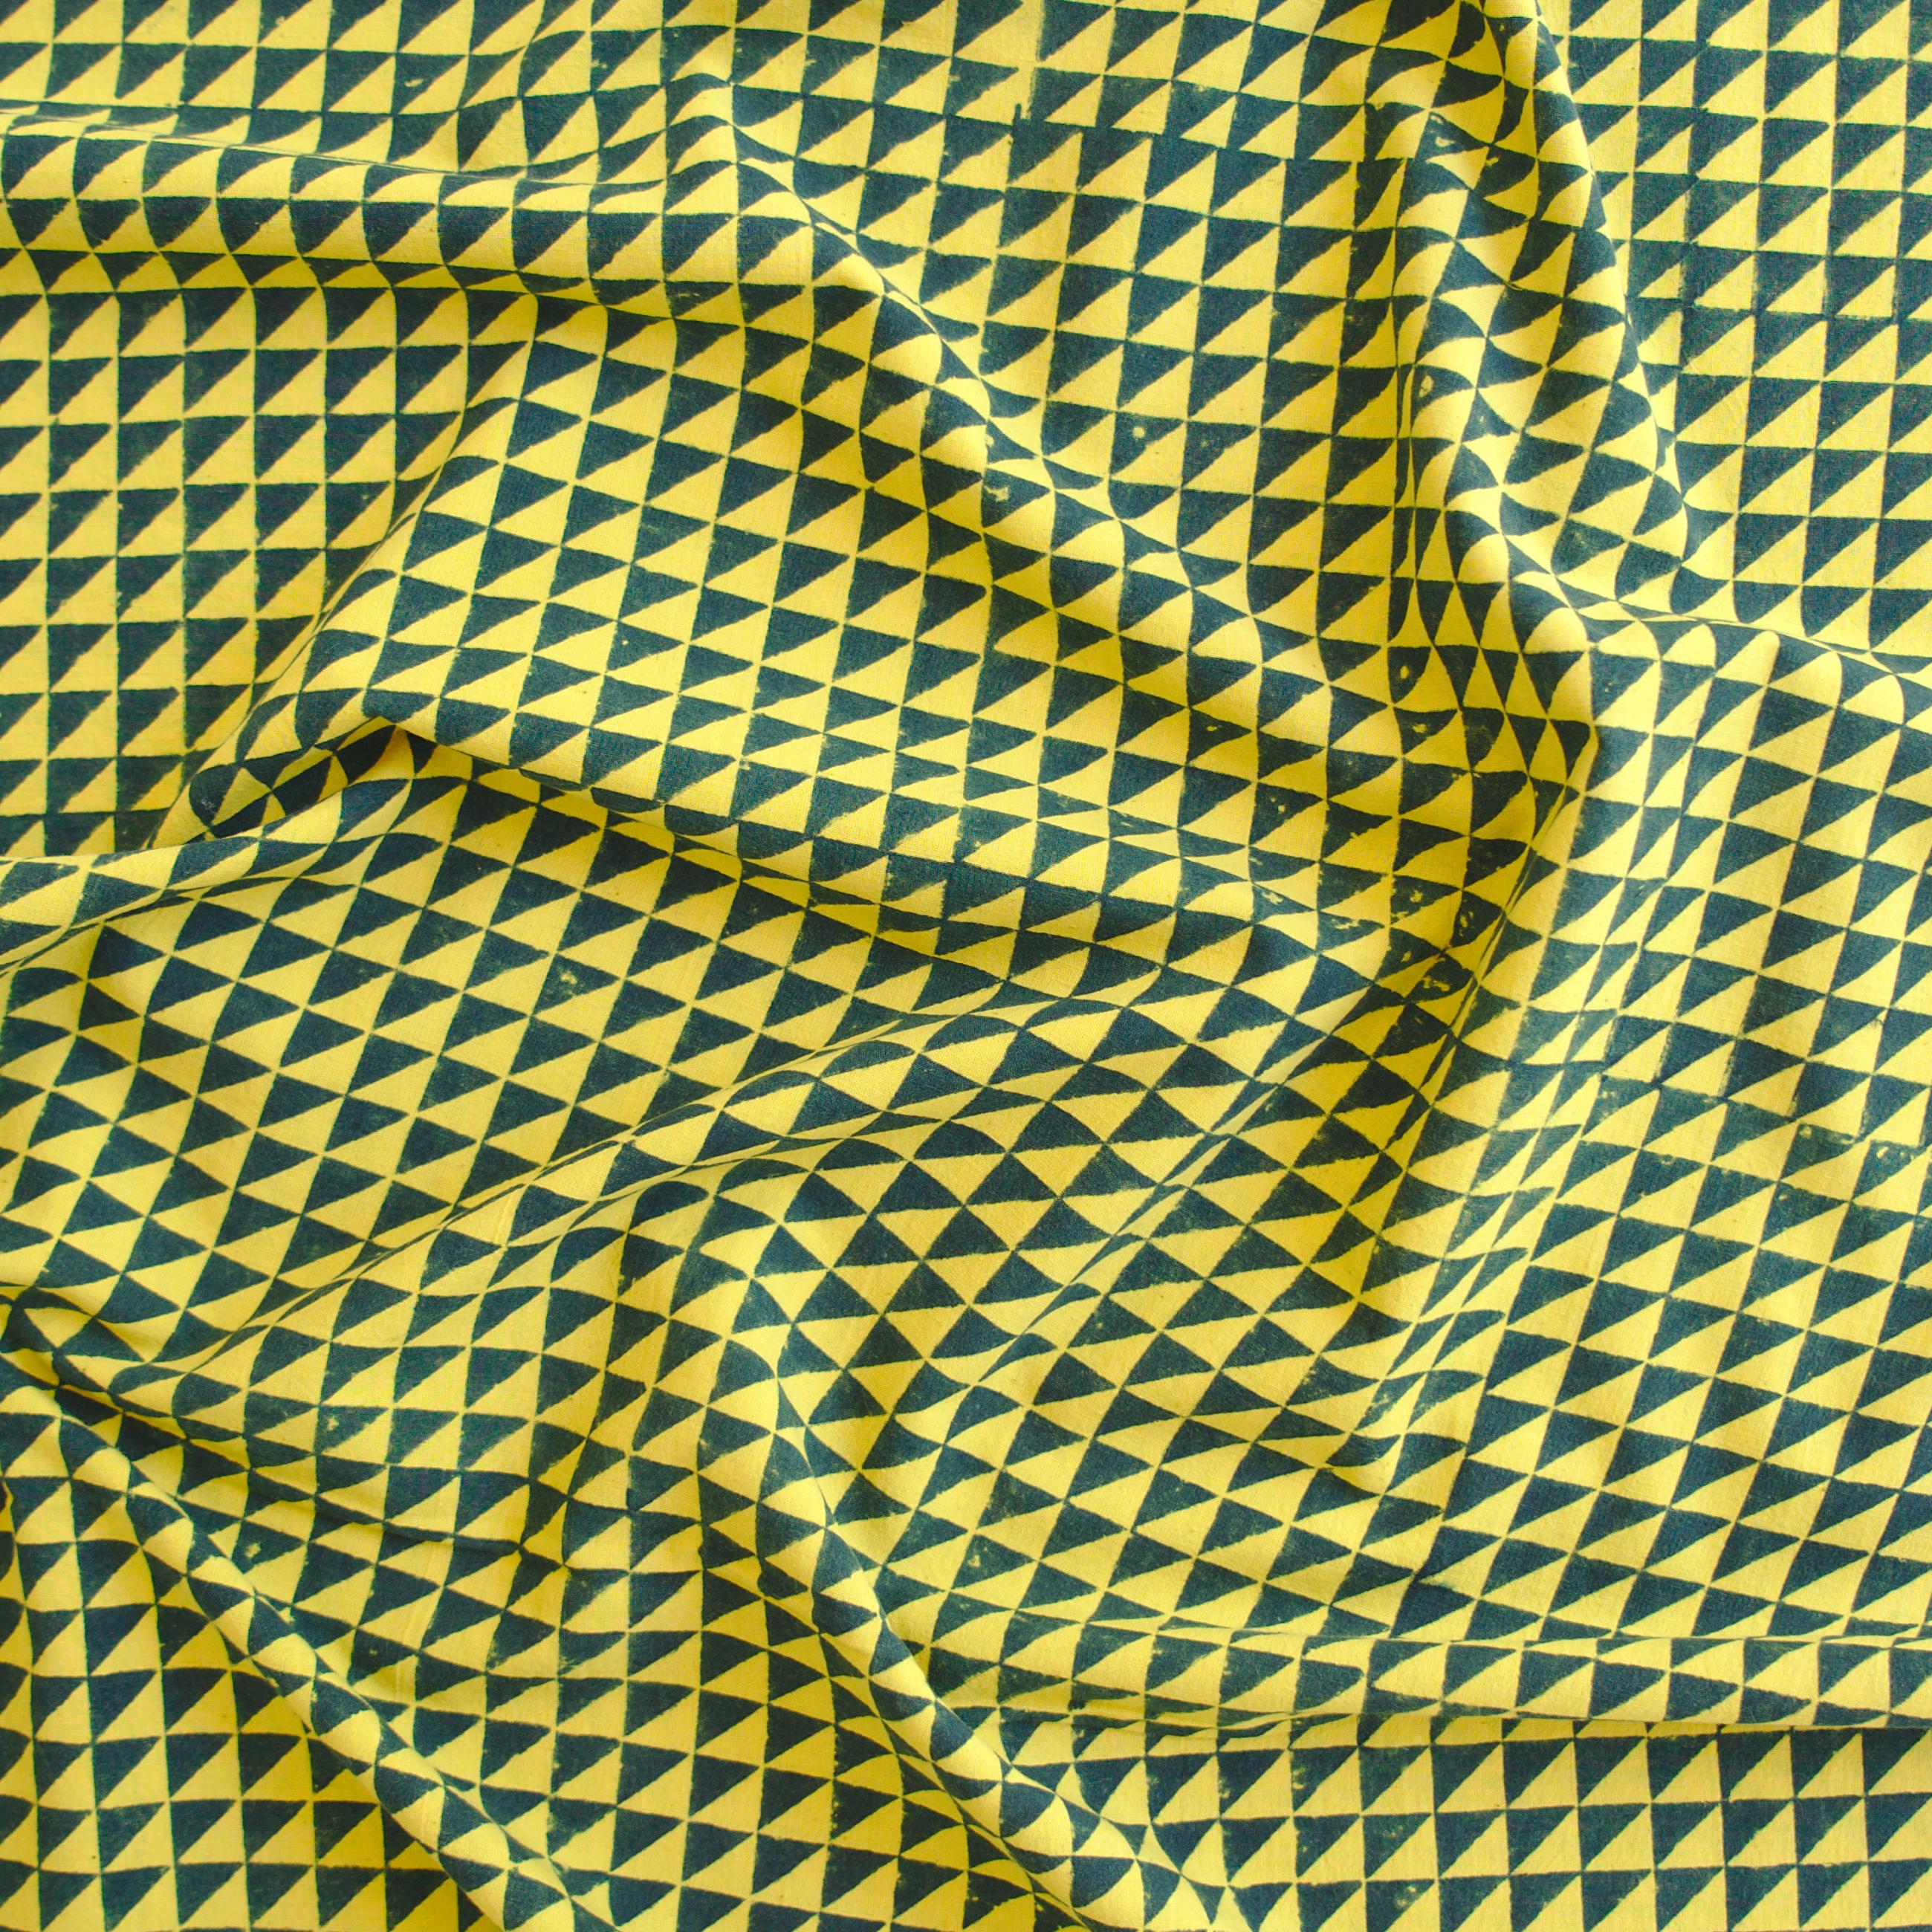 SIK27 - Block-Printed Cotton Fabric From India - Half Squares Design - Pomegranate Yellow and Green Indigo Dye - Contrast